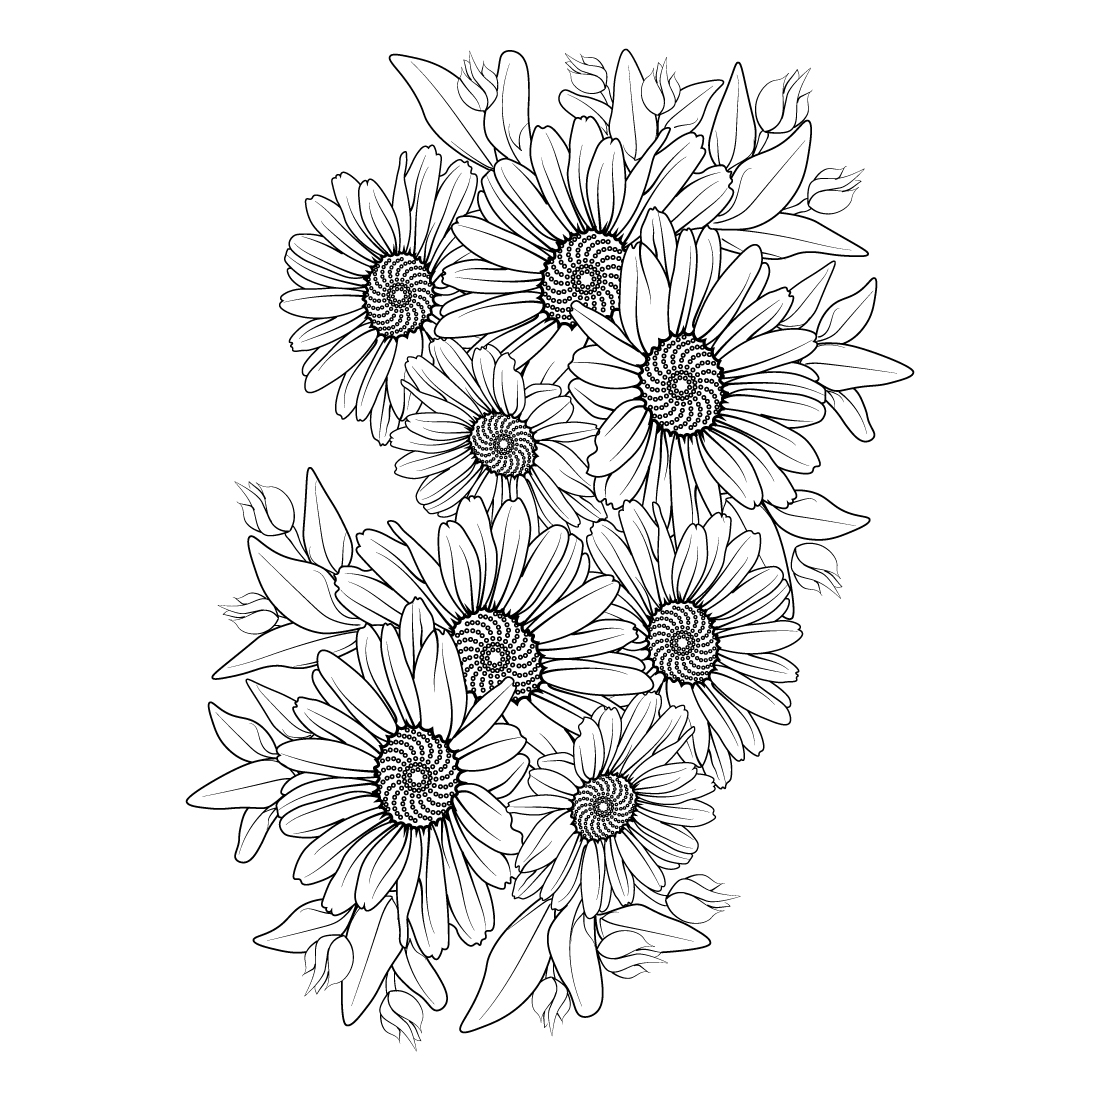 Daisies Semi-Permanent Tattoo. Lasts 1-2 weeks. Painless and easy to apply.  Organic ink. Browse more or create your own. | Inkbox™ | Semi-Permanent  Tattoos